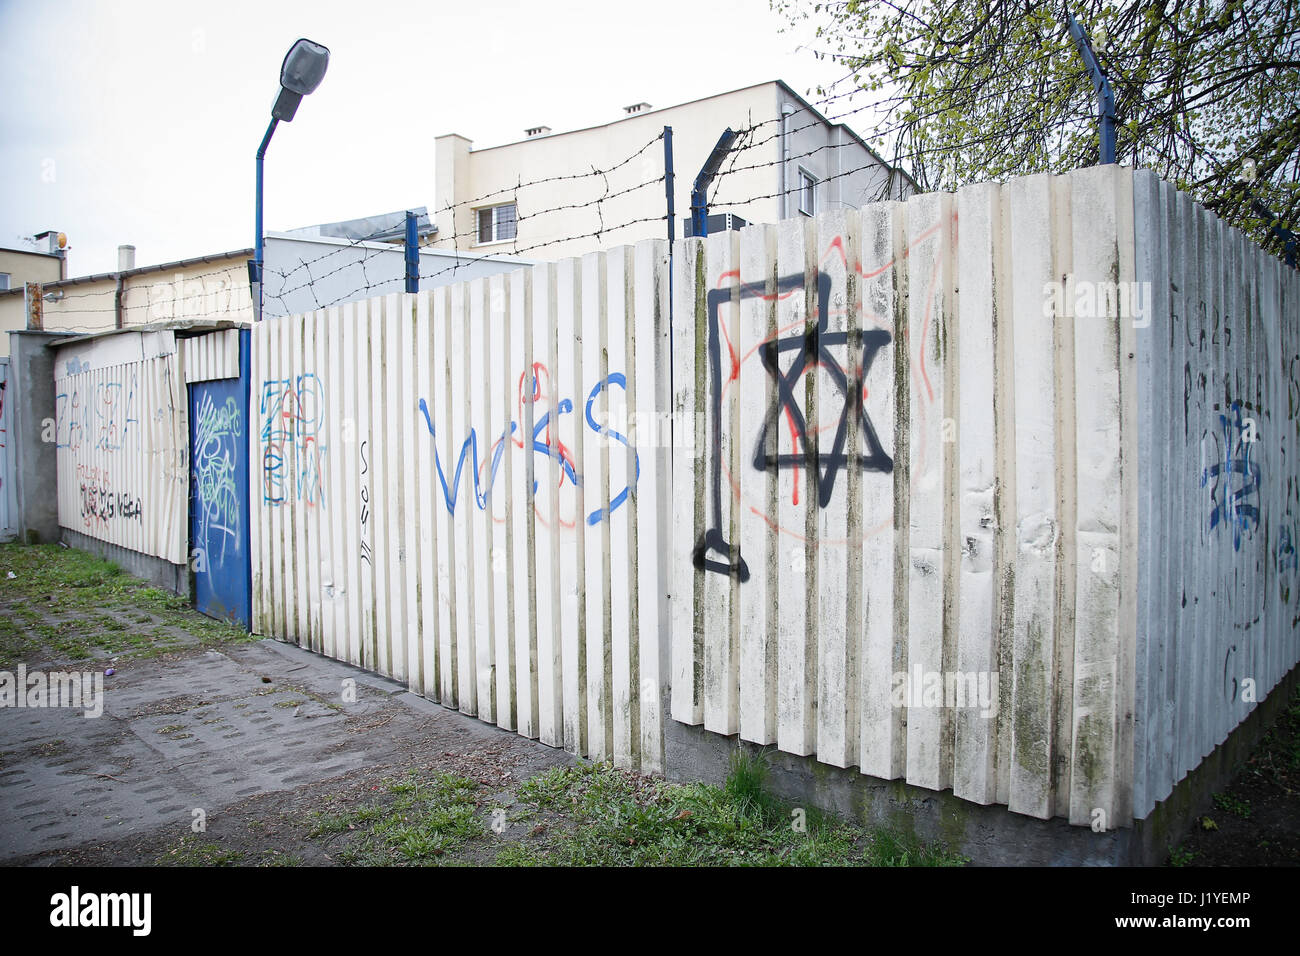 Bydgoszcz, Poland. 22nd April, 2017. A star of David is seen depicted hanging from a gallows indicating antisemitic symbolism. Since the end of 2015 w Stock Photo